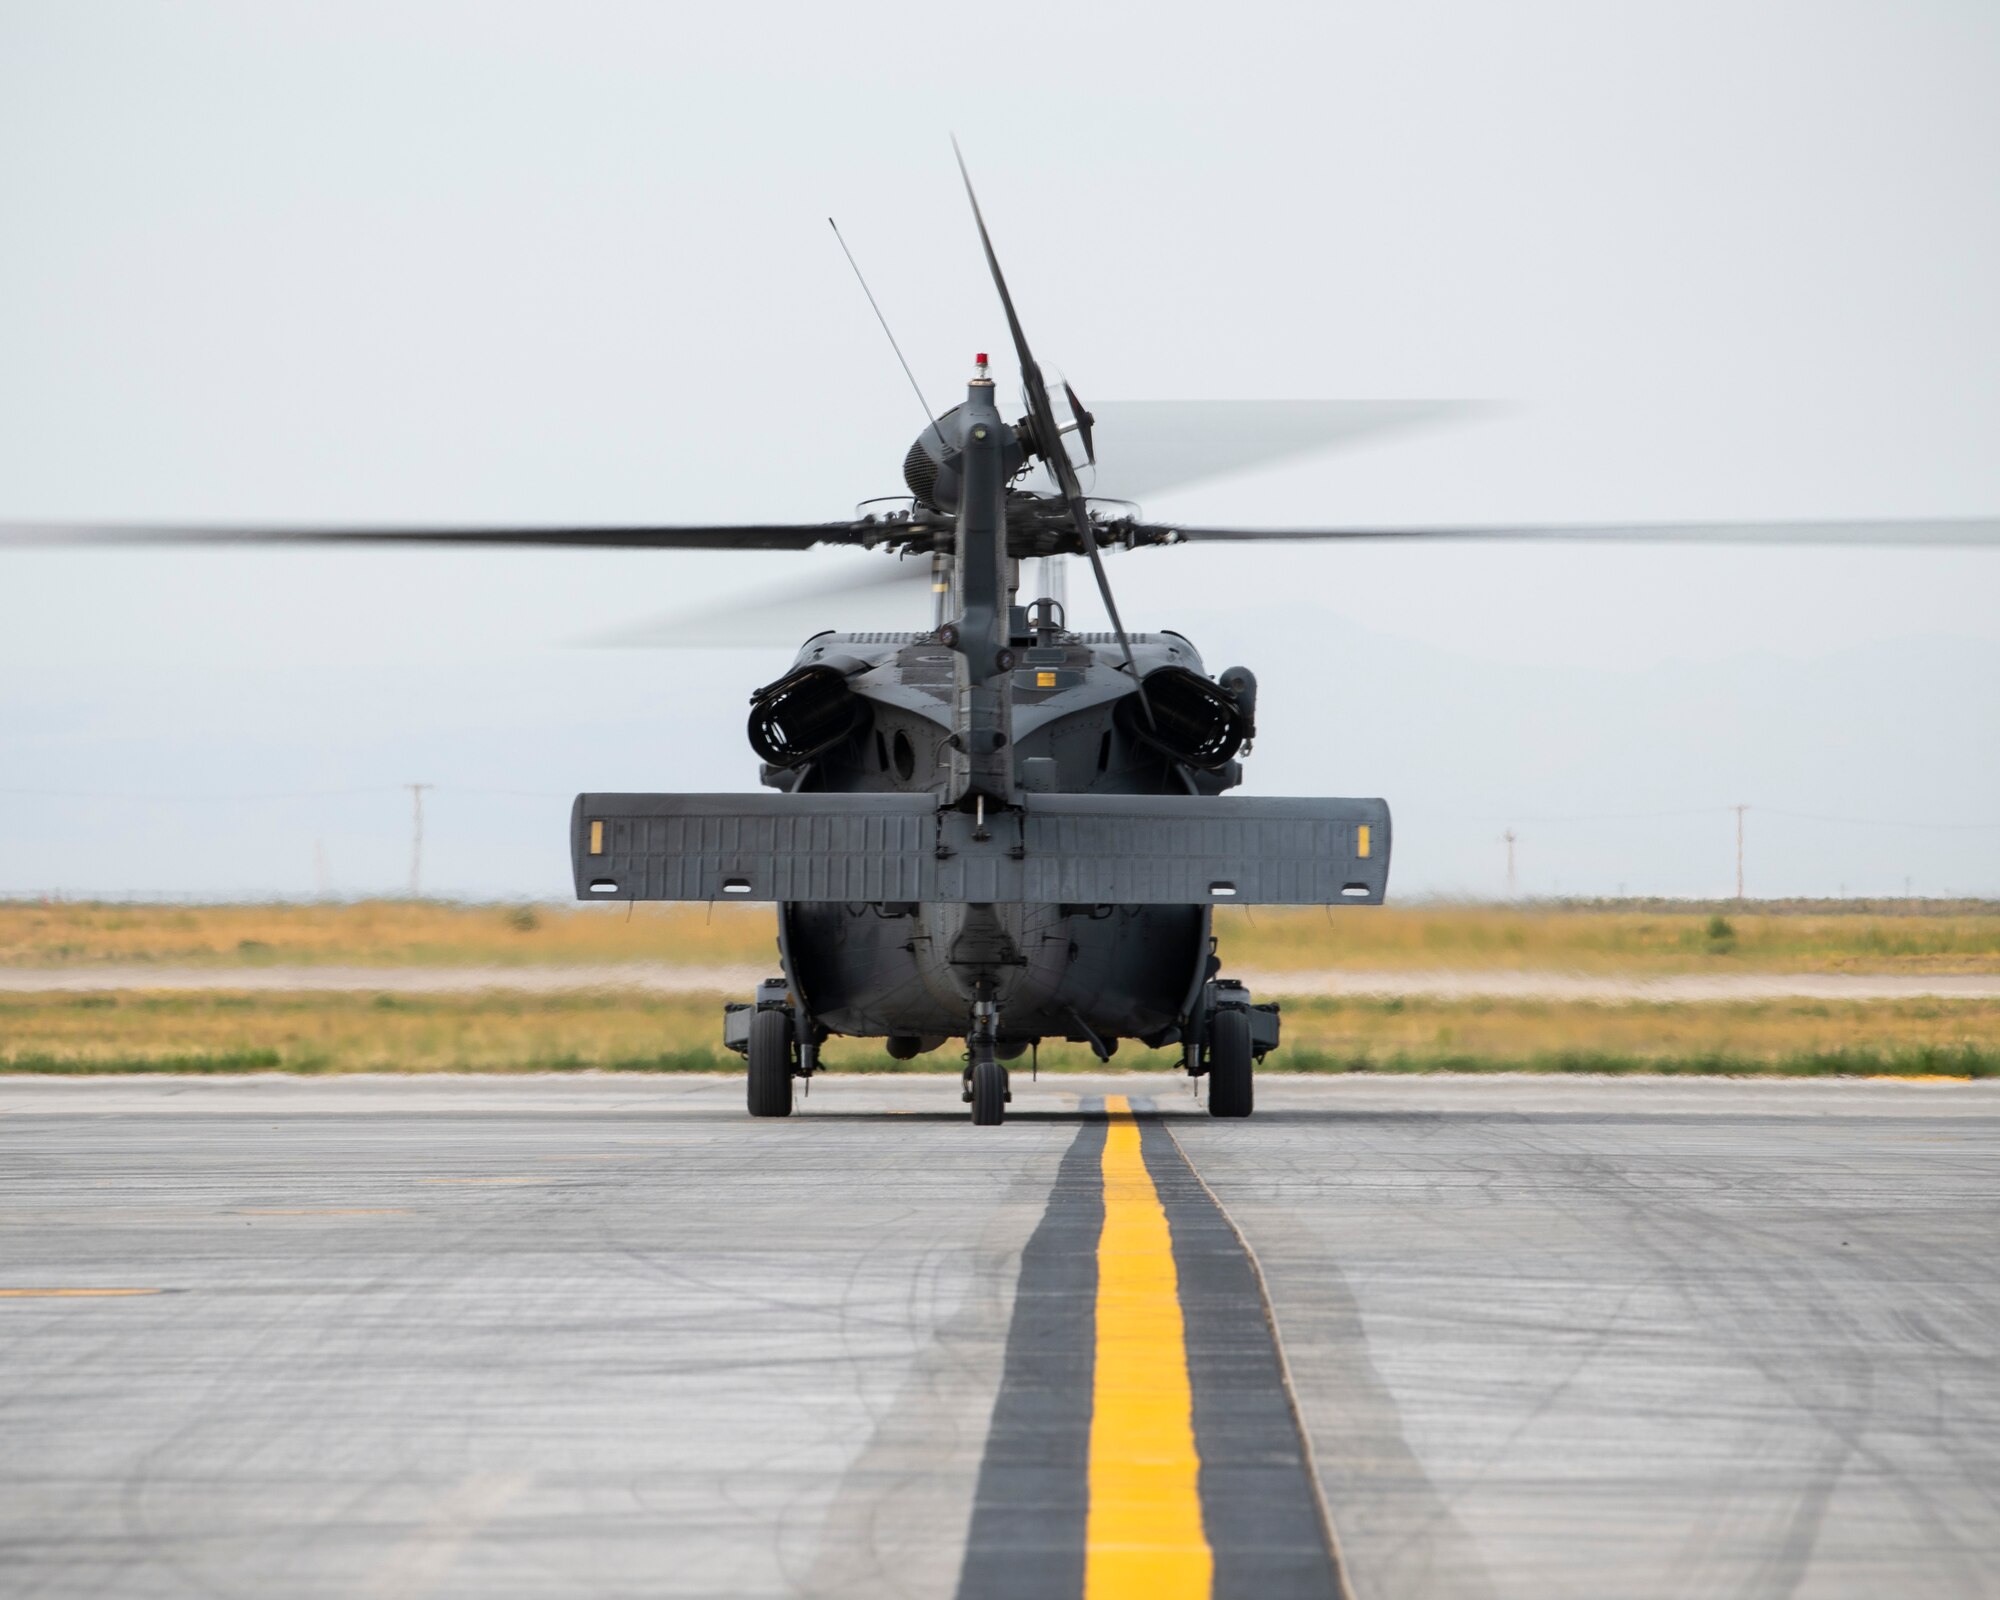 A U.S. Air Force HH-60G Pave Hawk from the 55th Rescue Squadron taxis down the flightline Aug. 17, 2020, at Mountain Home Air Force Base, Idaho. The 55th RQS is participating in Gunfighter Flag 20-1, where they train with joint and international partners to complete combat and rescue exercises. (U.S. Air Force photo by Airman 1st Class Andrew Kobialka)